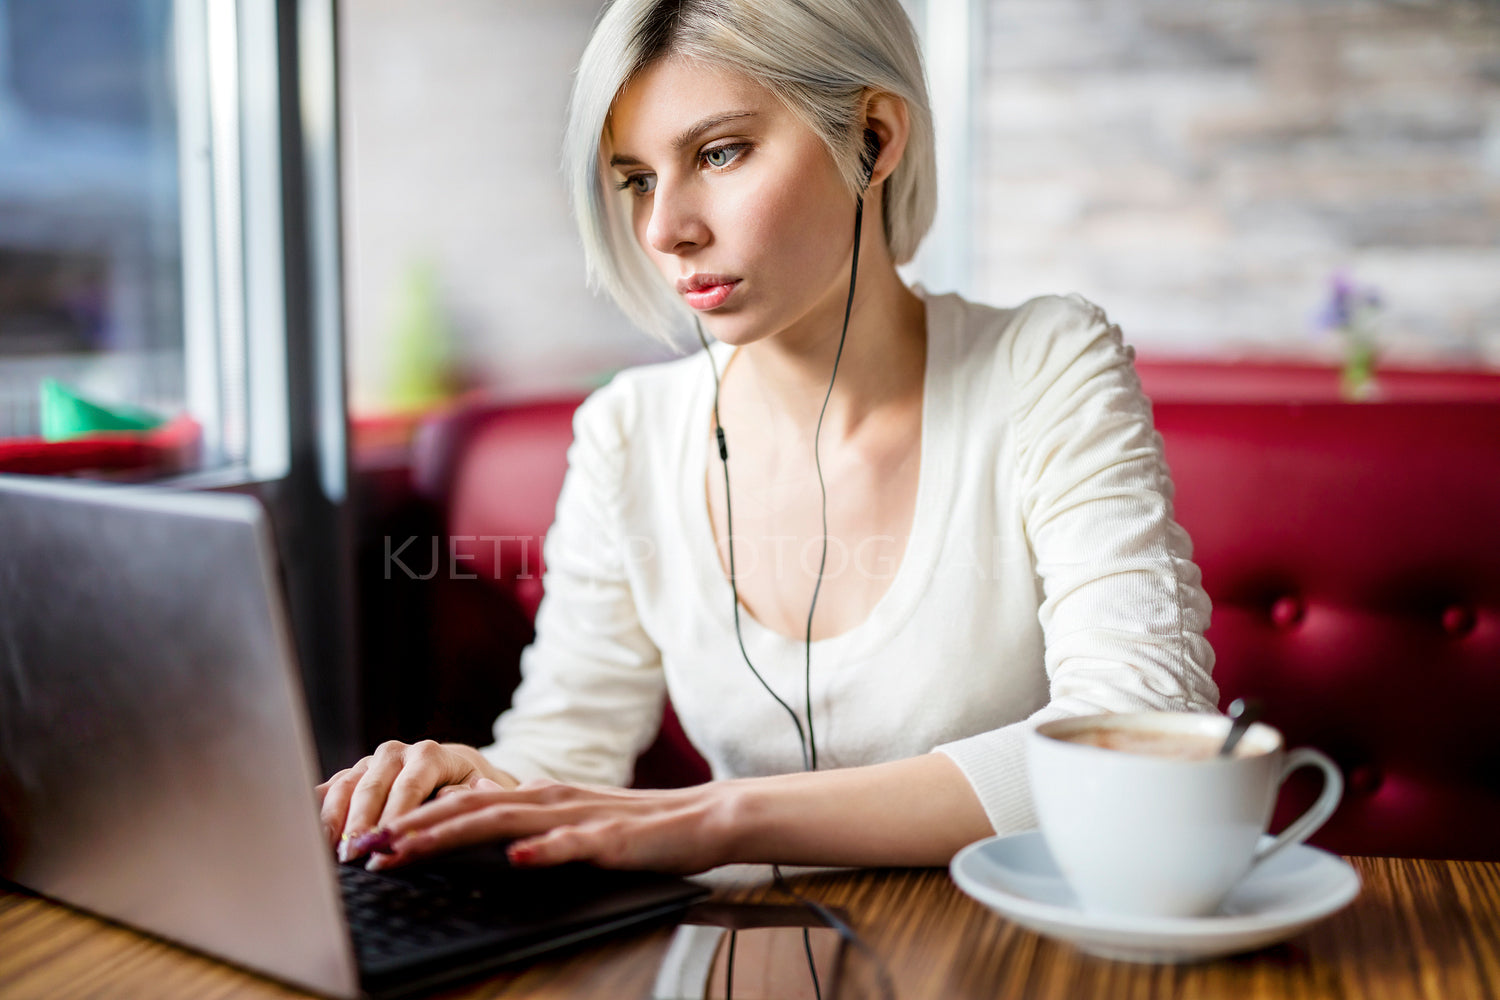 Woman Listening Music While Working On Laptop In Cafe